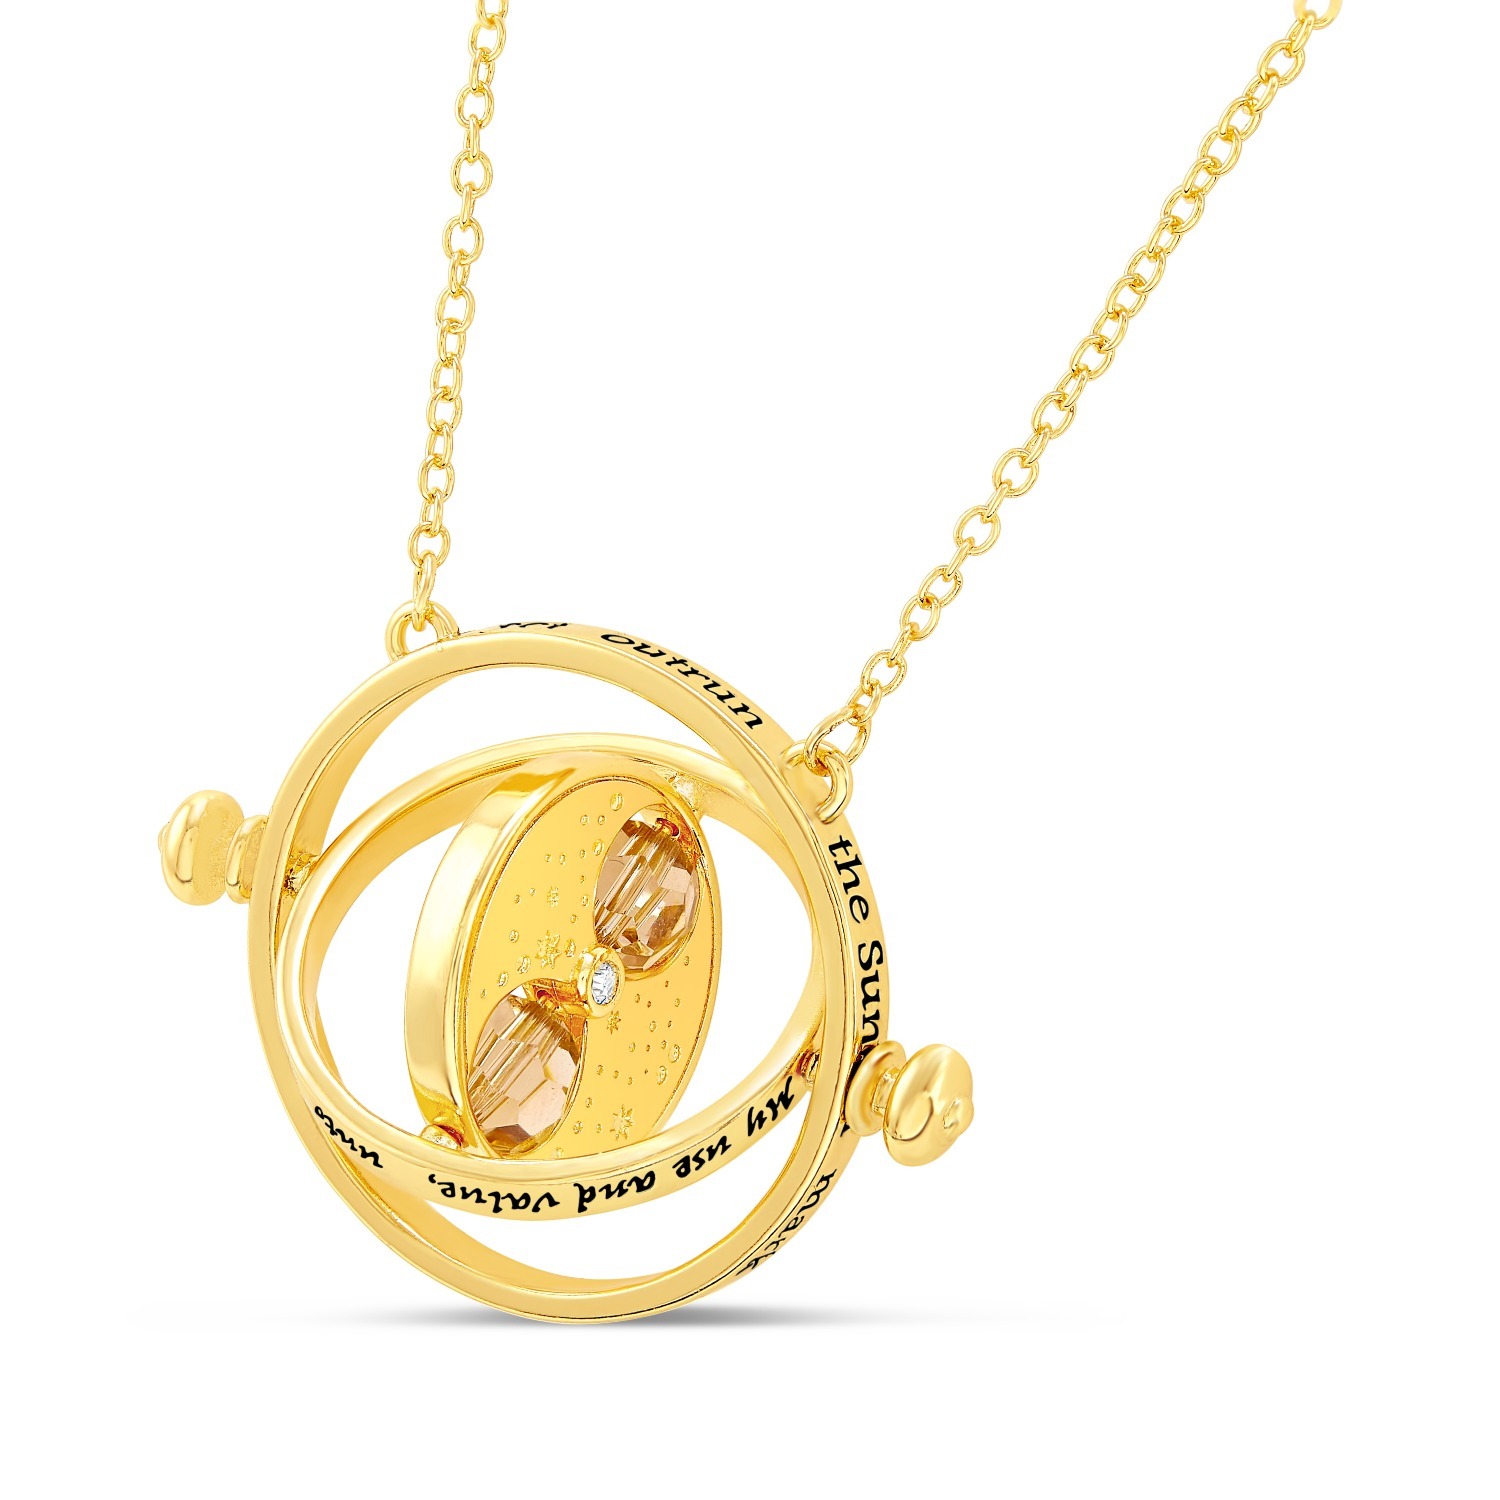 22" Gold Plated Harry Potter Hermione Time-Turner Hourglass Rotating Necklace $40 + Free Shipping